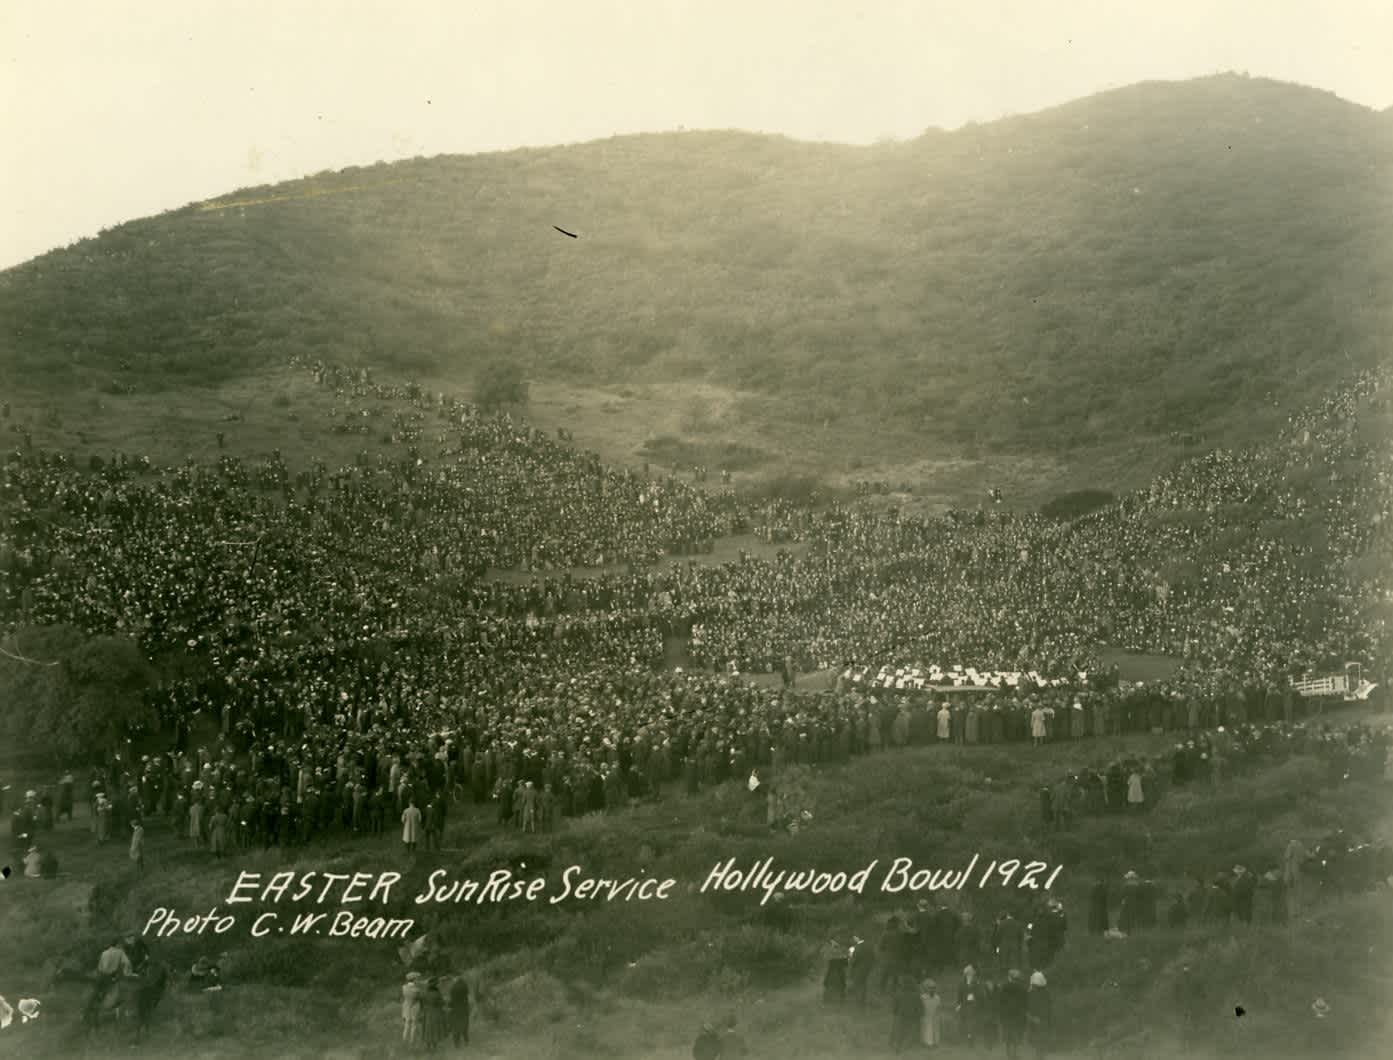 The first Easter Sunrise Service at the Hollywood Bowl drew 10,000 people in 1921. A large crowd at the first Easter Sunrise Service at the Hollywood Bowl, 1921.
The Los Angeles Philharmonic Orchestra sits with white sheet music, and most people are standing or sitting on the ground.